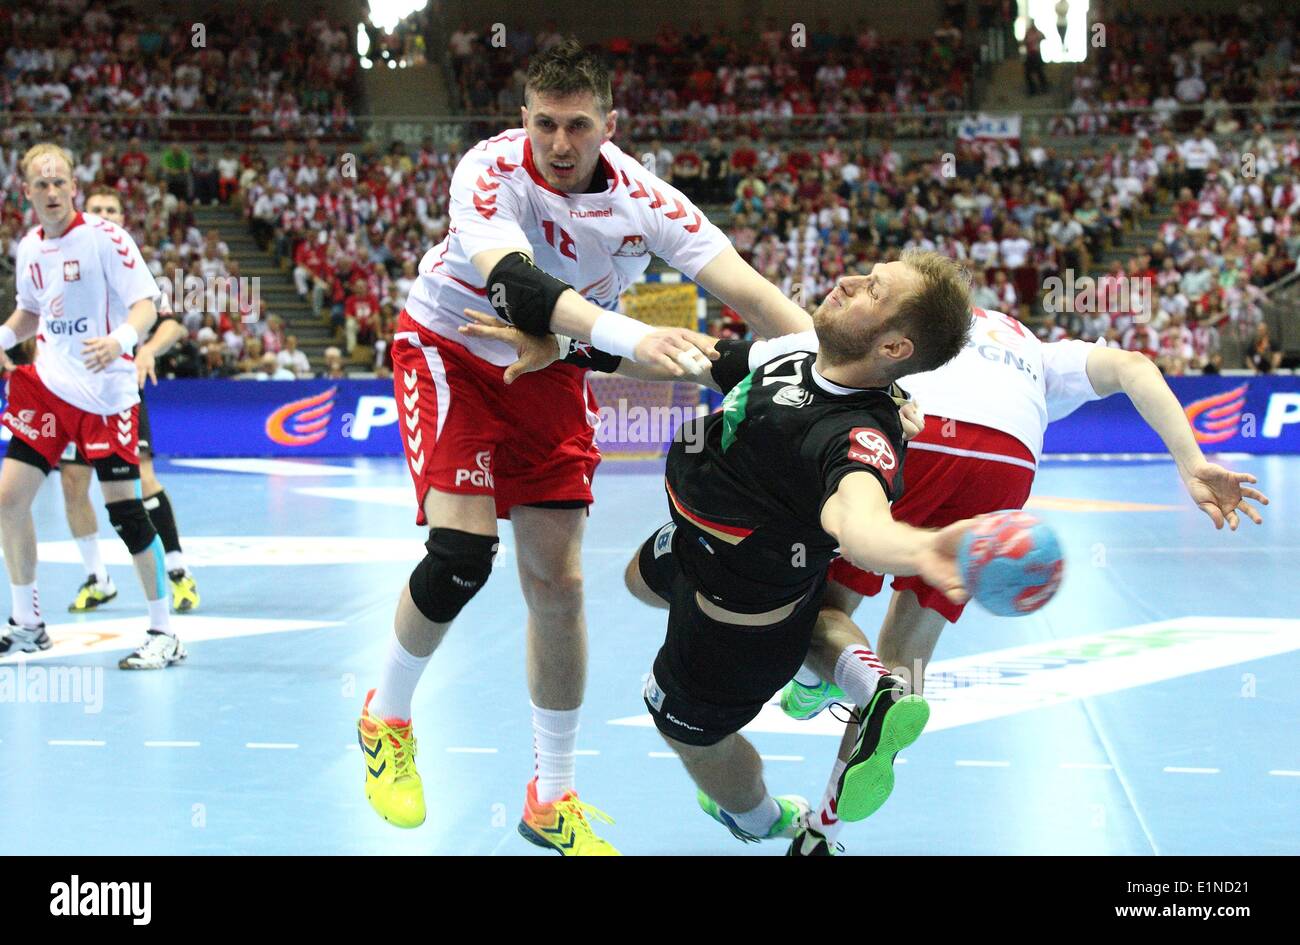 Gdansk, Poland 7th, June 2014 Quatar 2015 Men's World Handball Championship Play Off game between Poland and Germany at ERGO Arena sports hall. Steffen Weinhold (17) in action during the game. Credit:  Michal Fludra/Alamy Live News Stock Photo